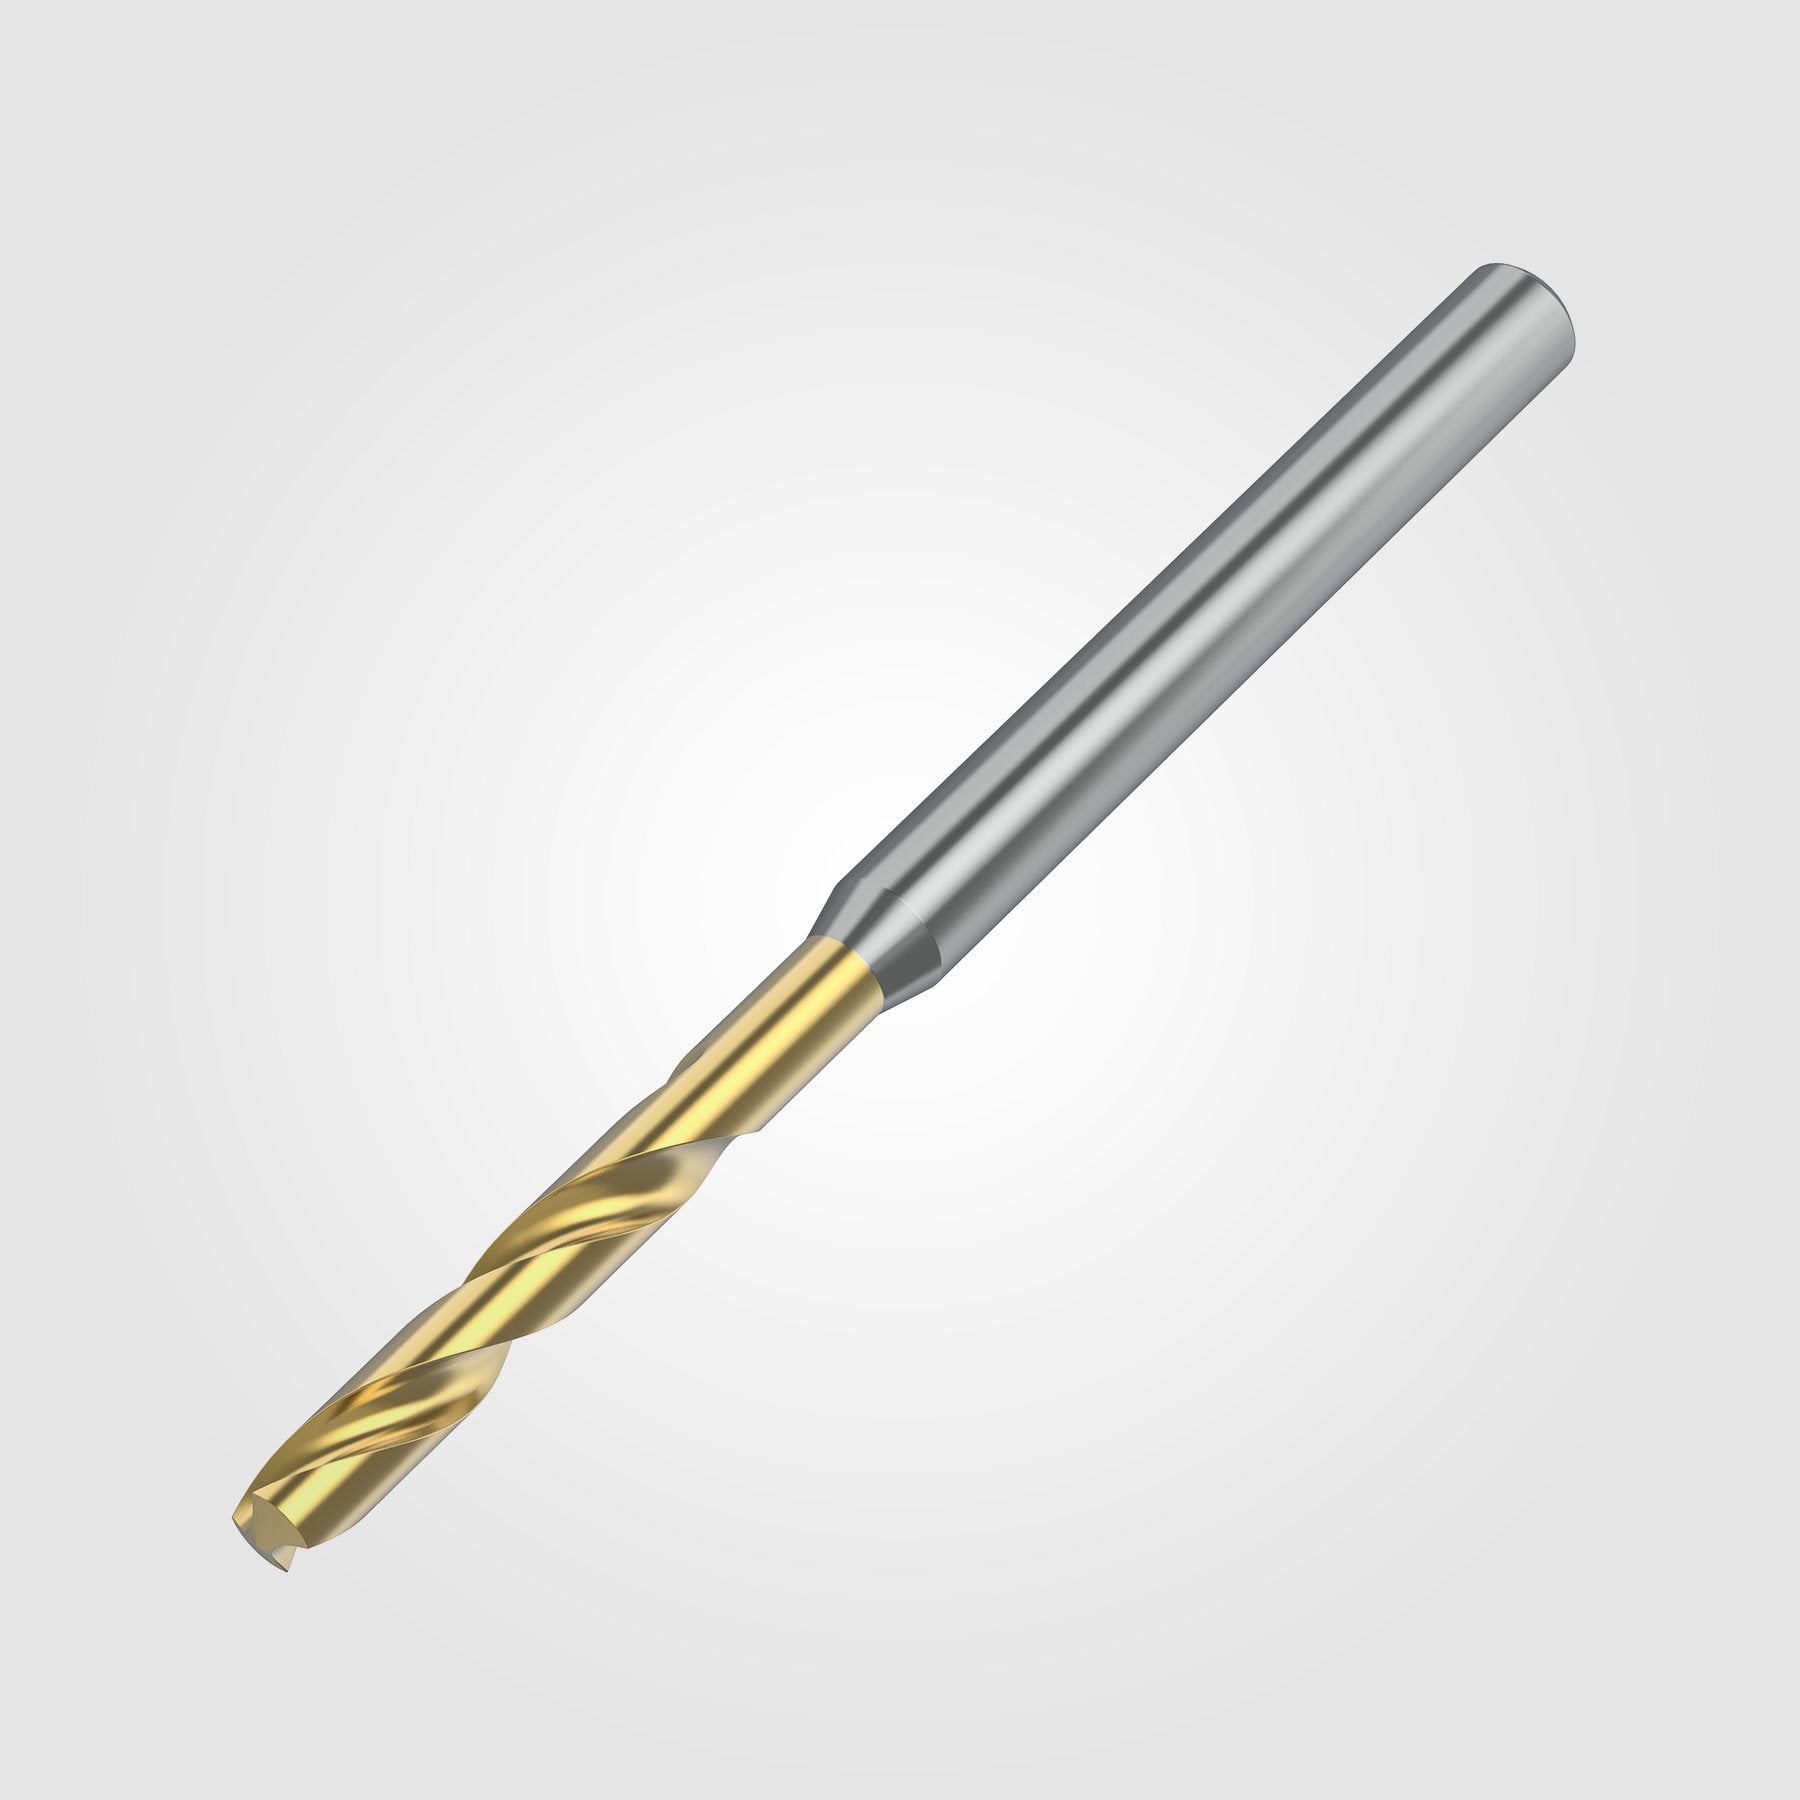 GOdrill (THROUGH COOLANT) | 12.4mm / .4882" / 3xD | SOLID CARBIDE DRILL | 4151234